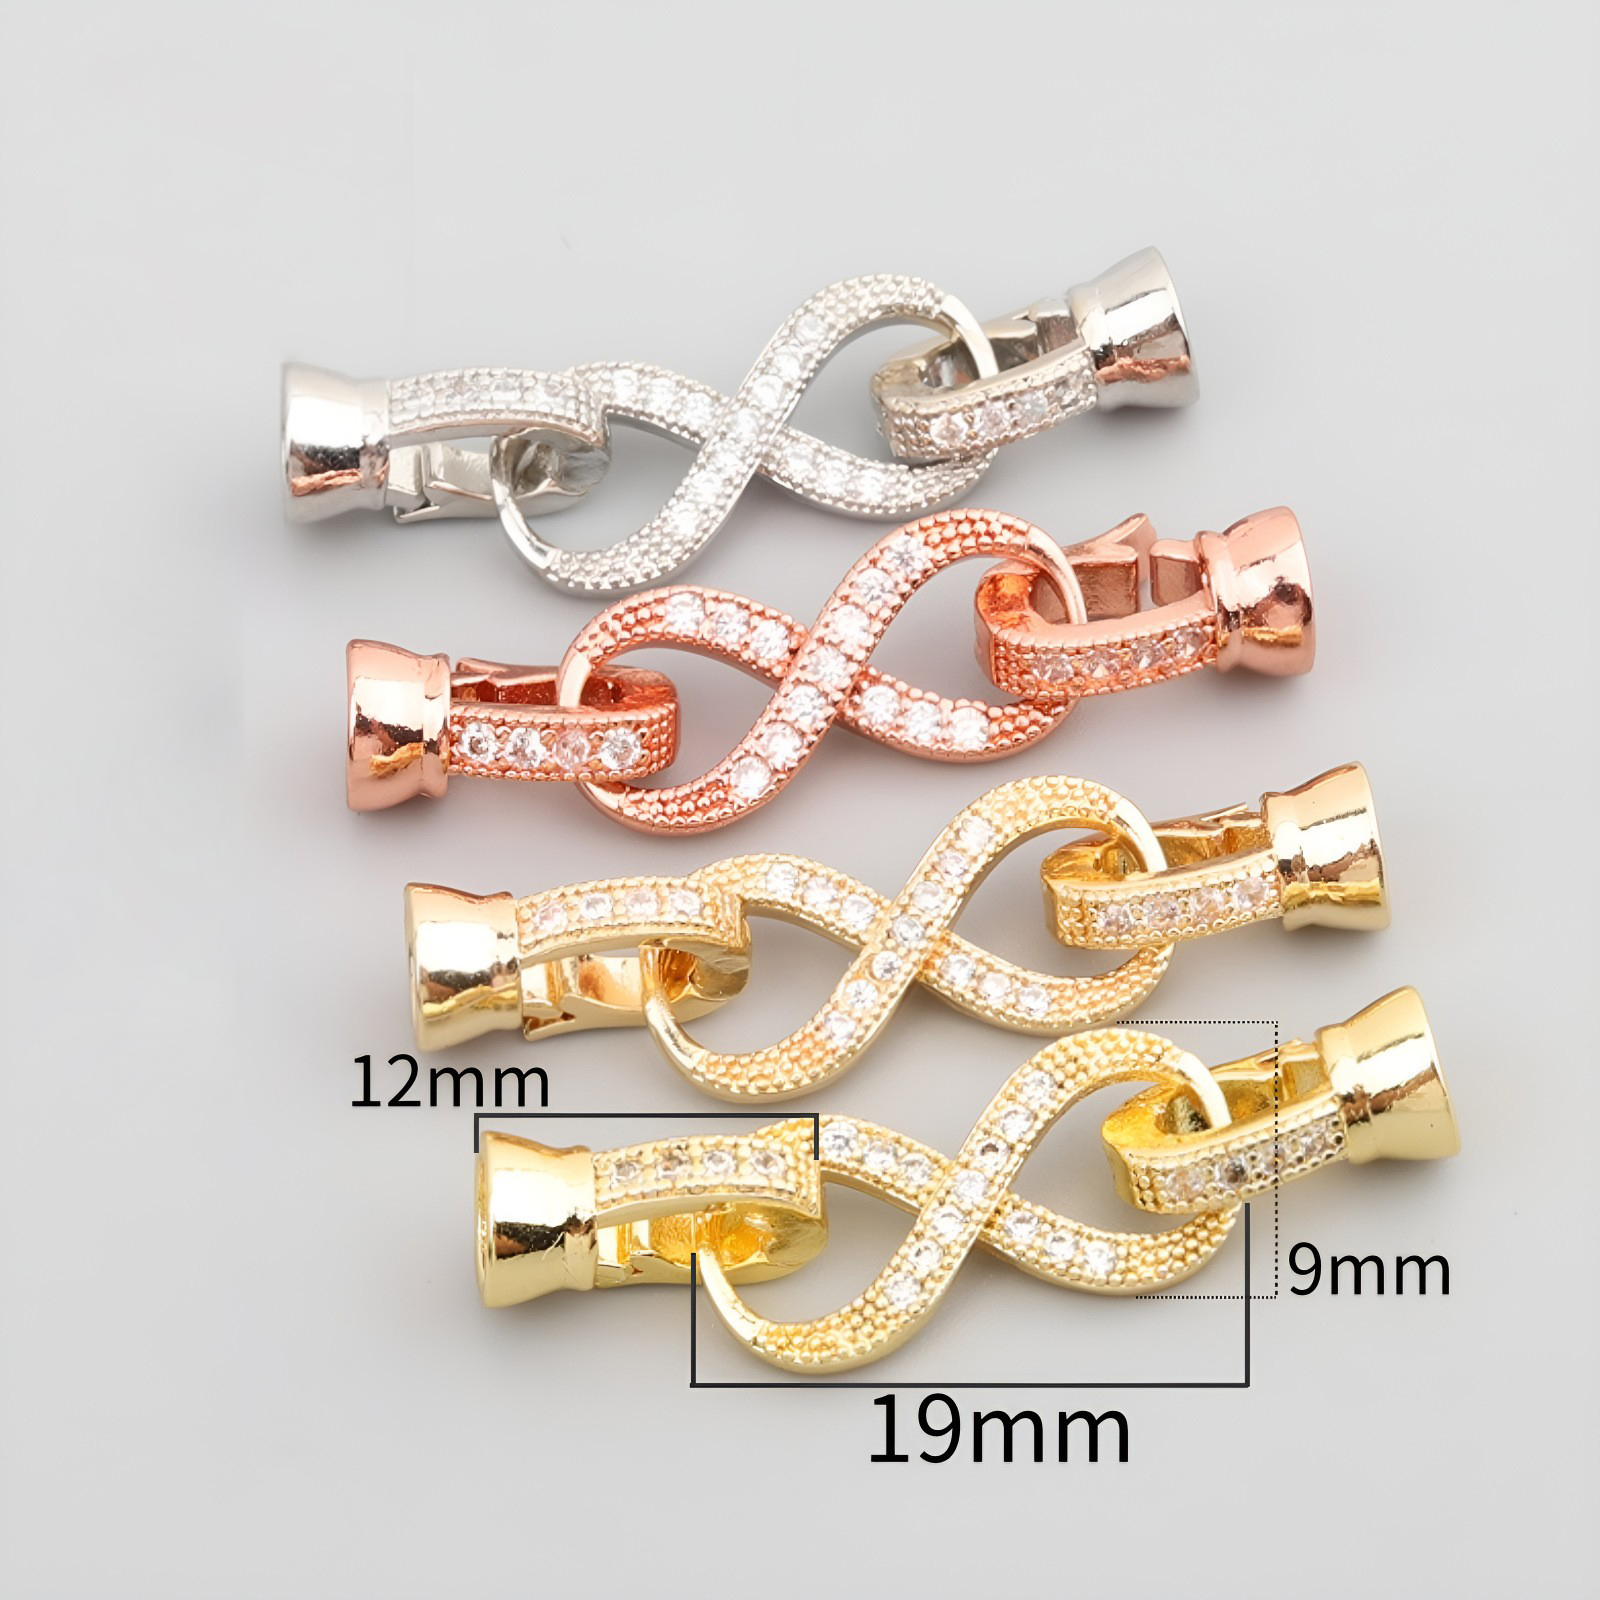 15:Figure-eight button Rose gold/color preserving